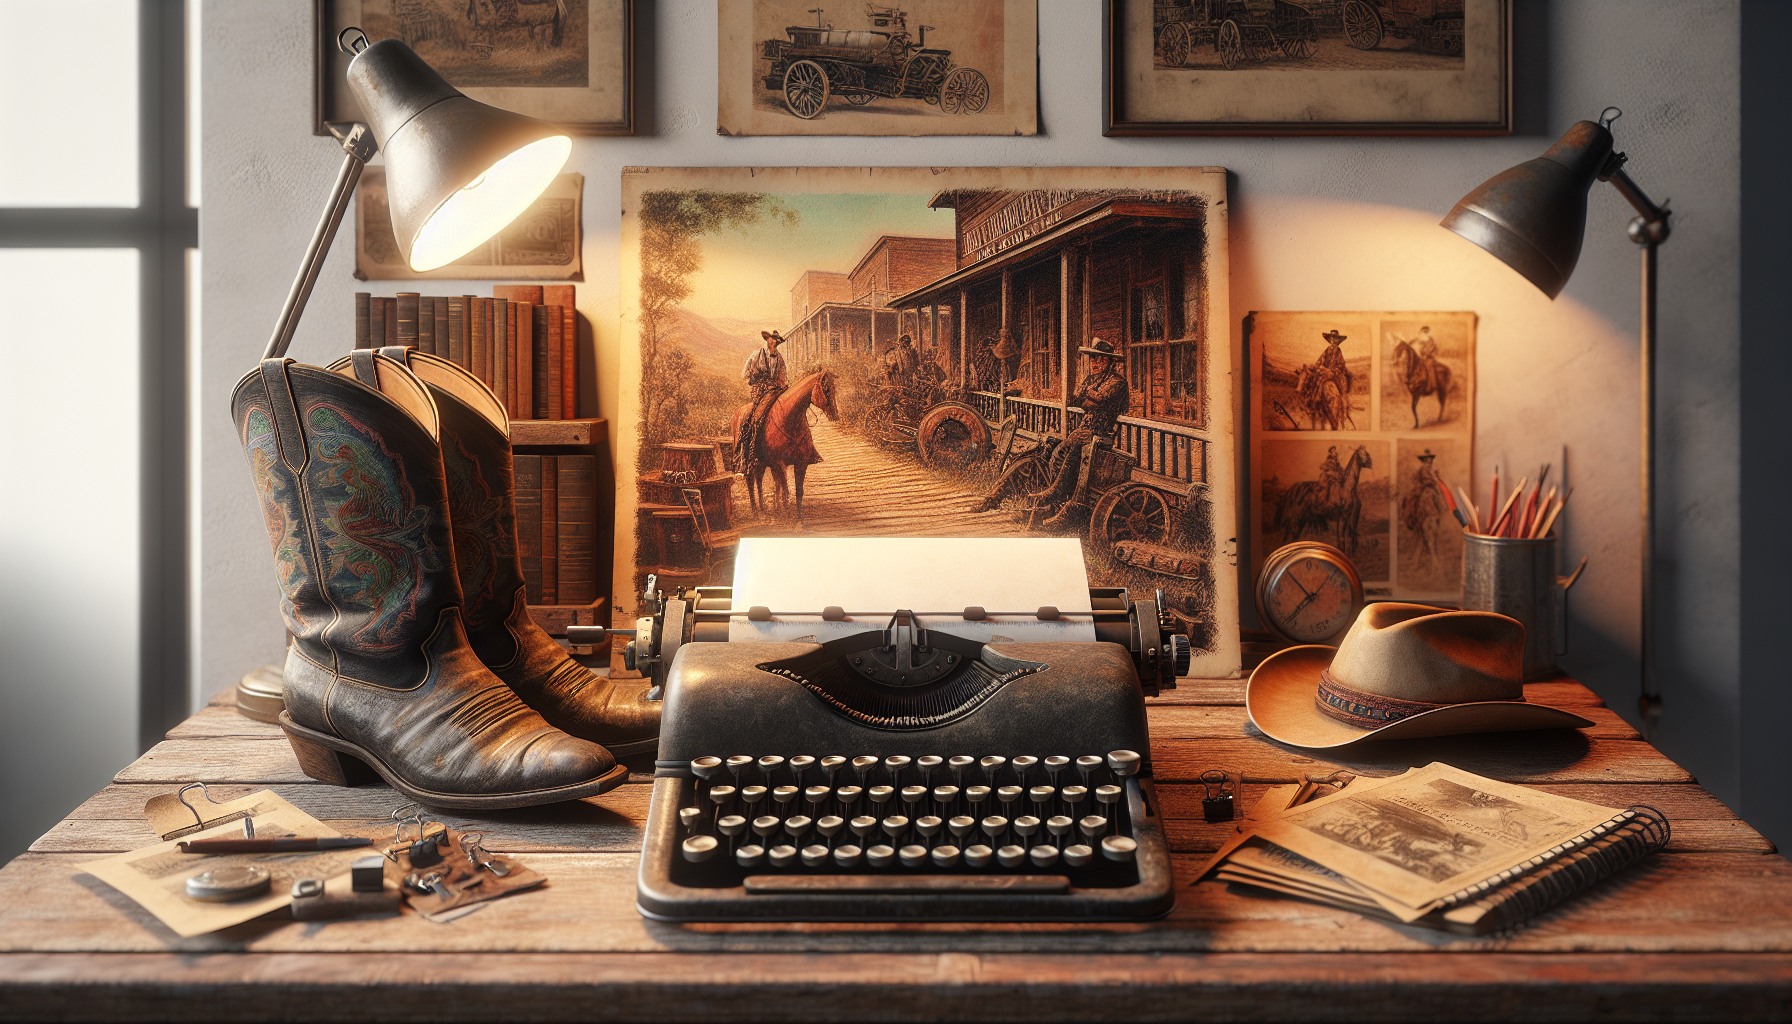 A vintage typewriter on a rustic wooden desk with a screenplay manuscript titled High Noon Redemption, surrounded by old western movie posters, a cowboy hat, and a pair of worn leather boots, set in a